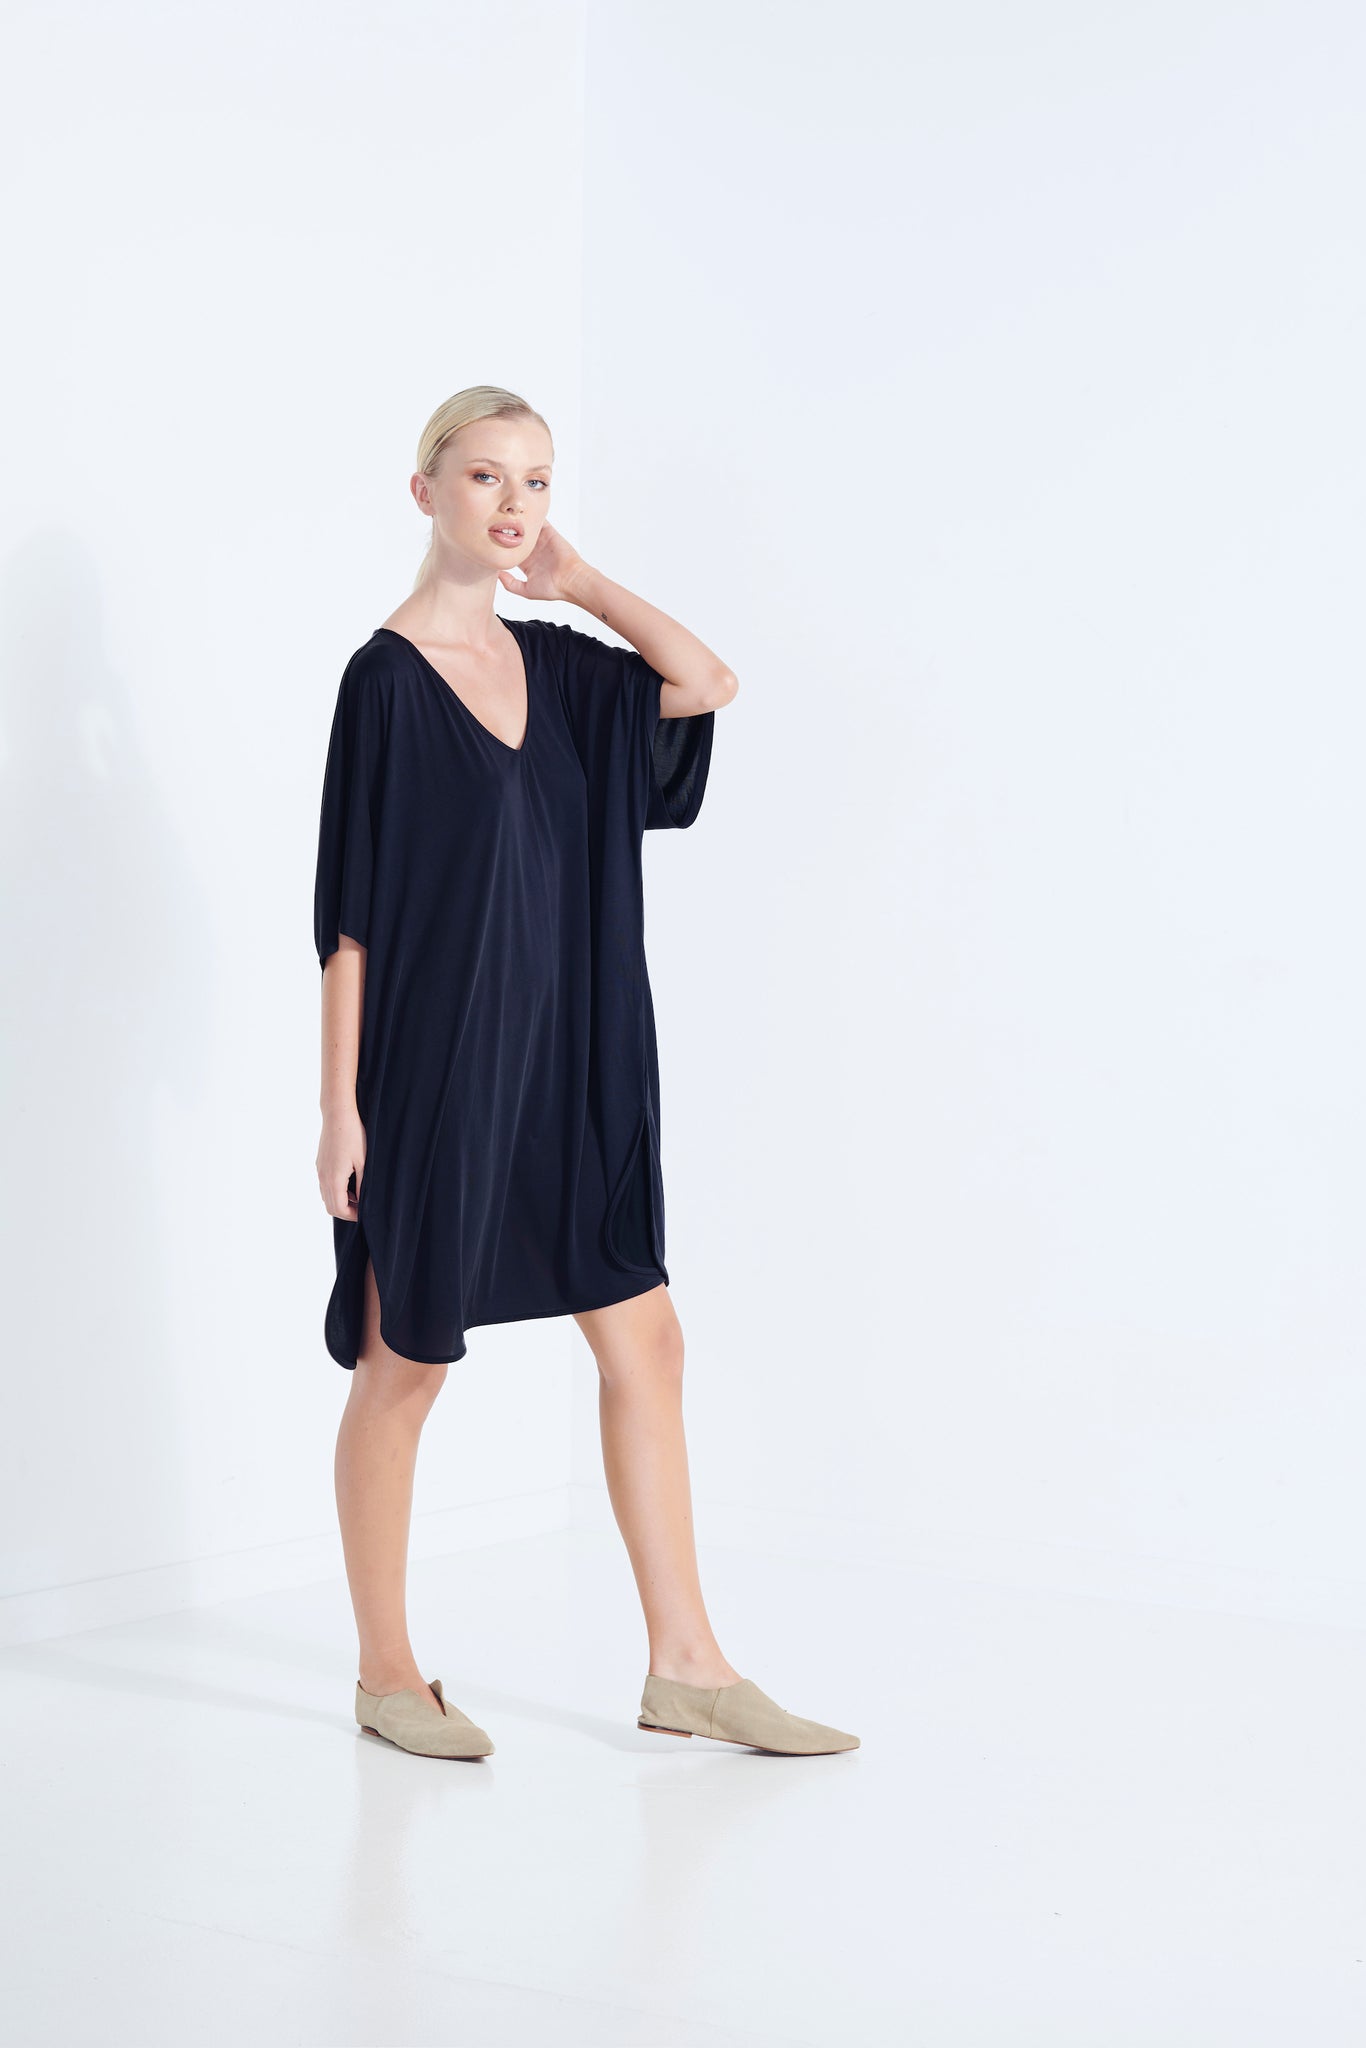 THEMIS DRESS LONGLINE T-SHIRT BEECHWOOD MODAL STRETCH WITH REMOVABLE TIE DARK WASHED BLACK FRONTSIDE VIEW